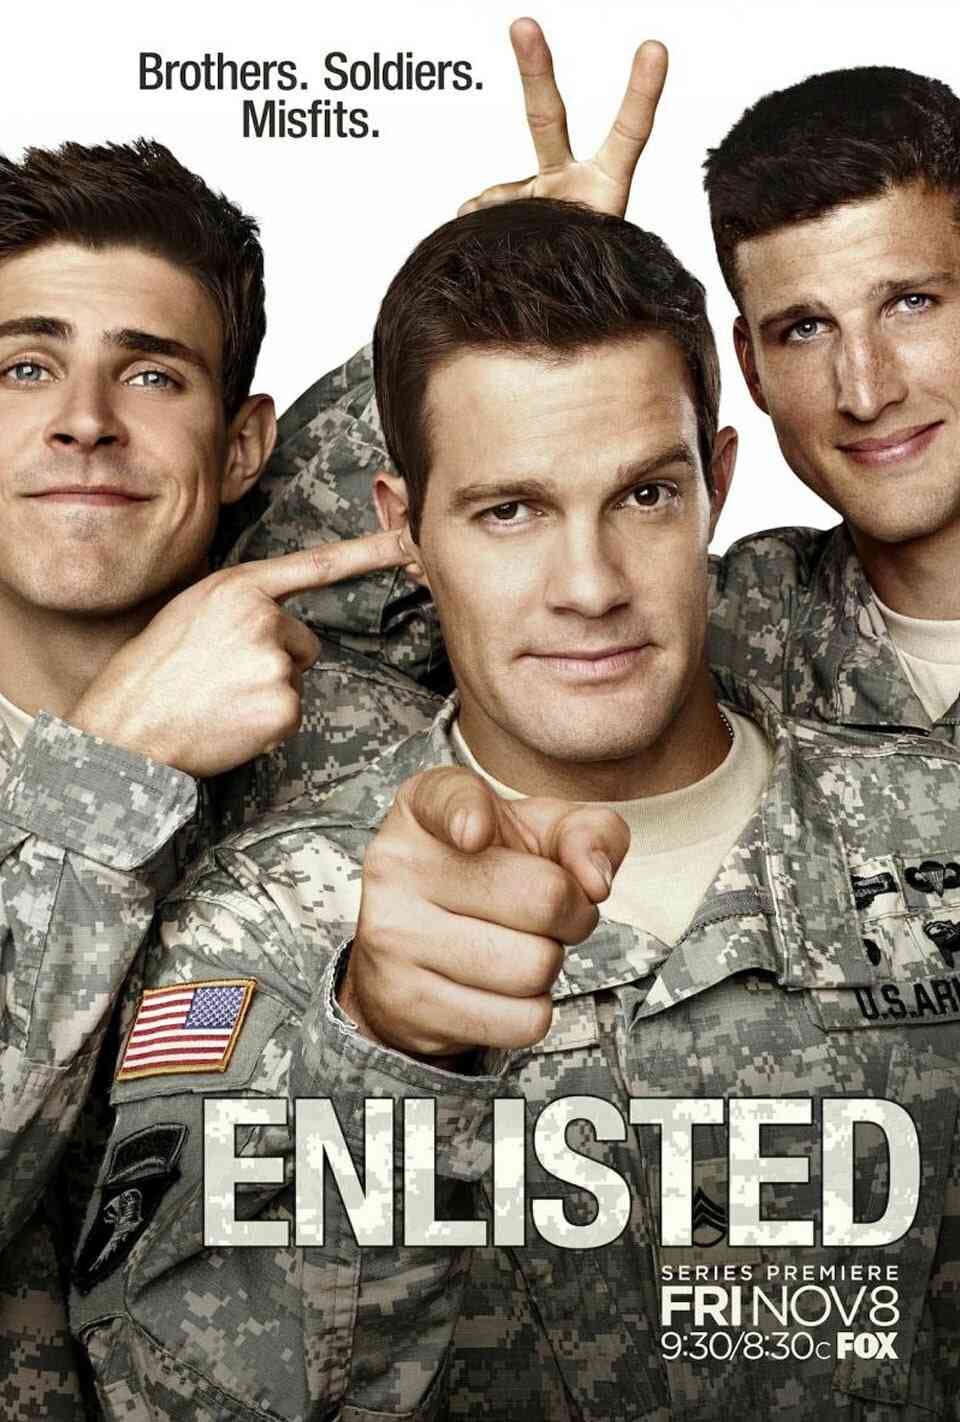 Read Enlisted screenplay (poster)